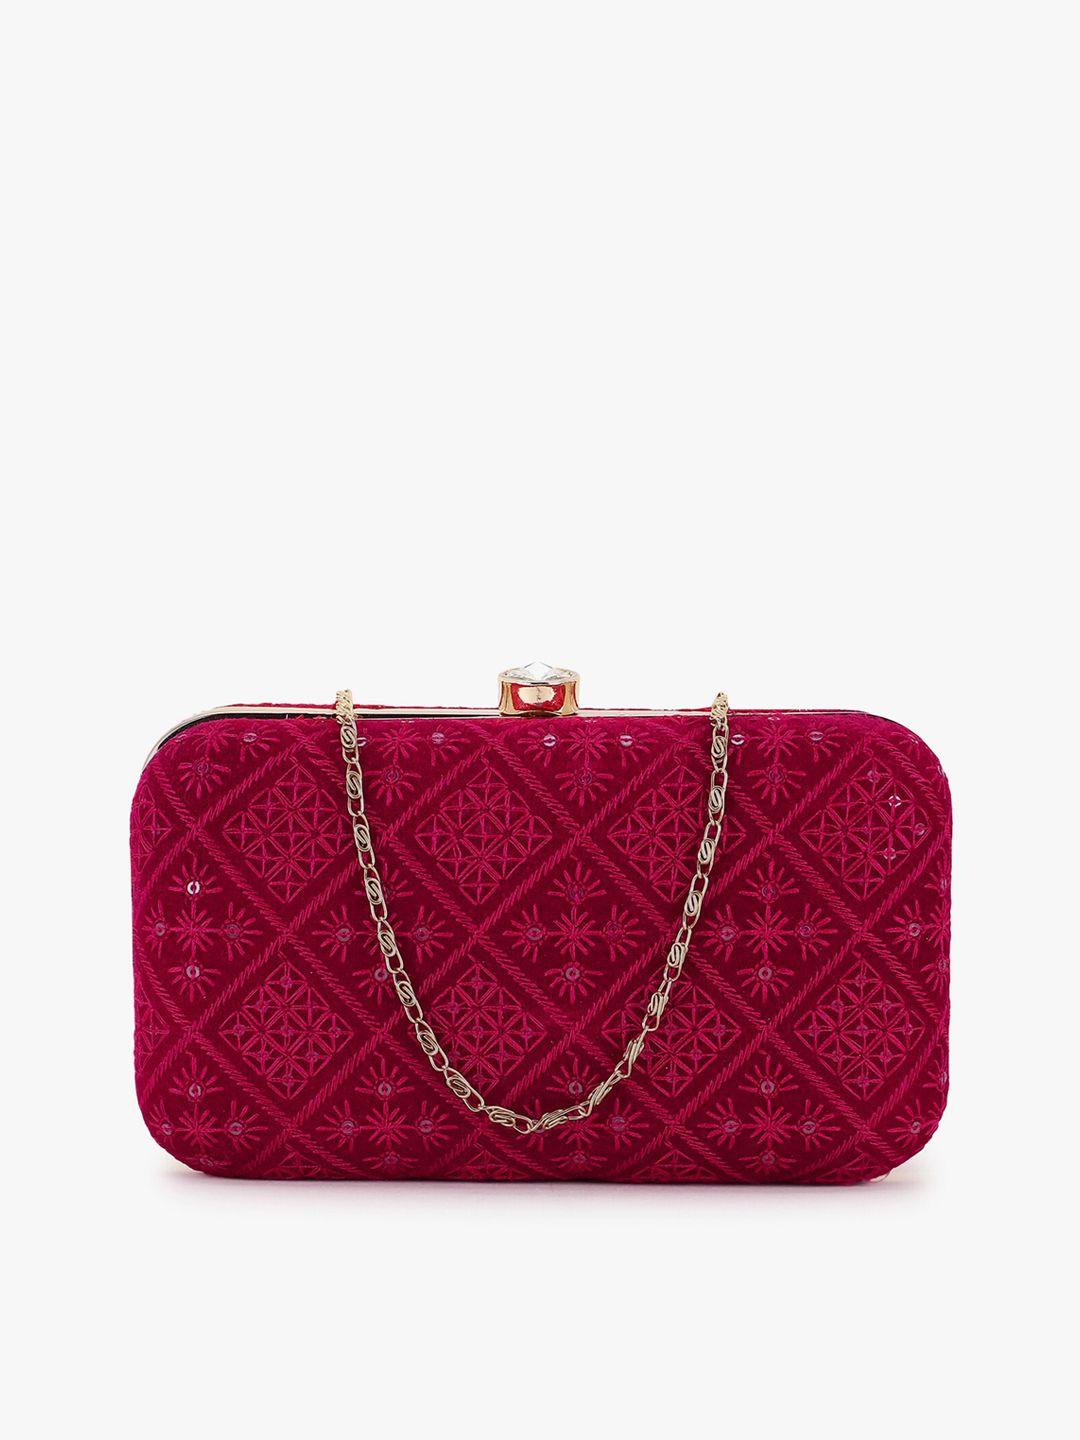 anekaant magenta & gold-toned embroidered box clutch